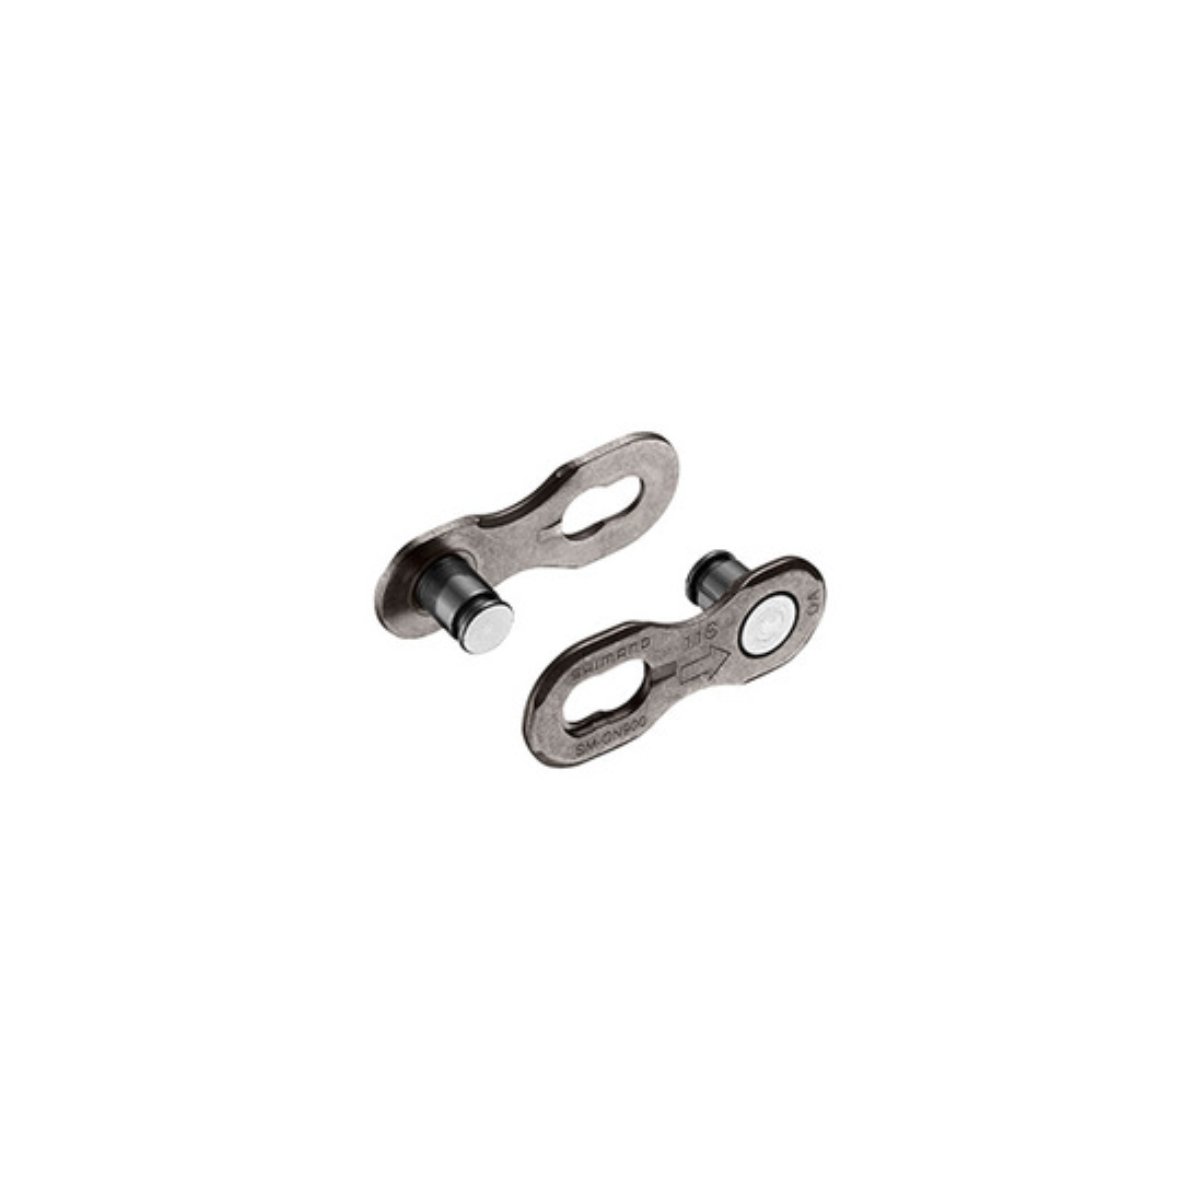 SHIMANO QUICK-LINK SM-CN900-11,  11-SPEED CHAIN